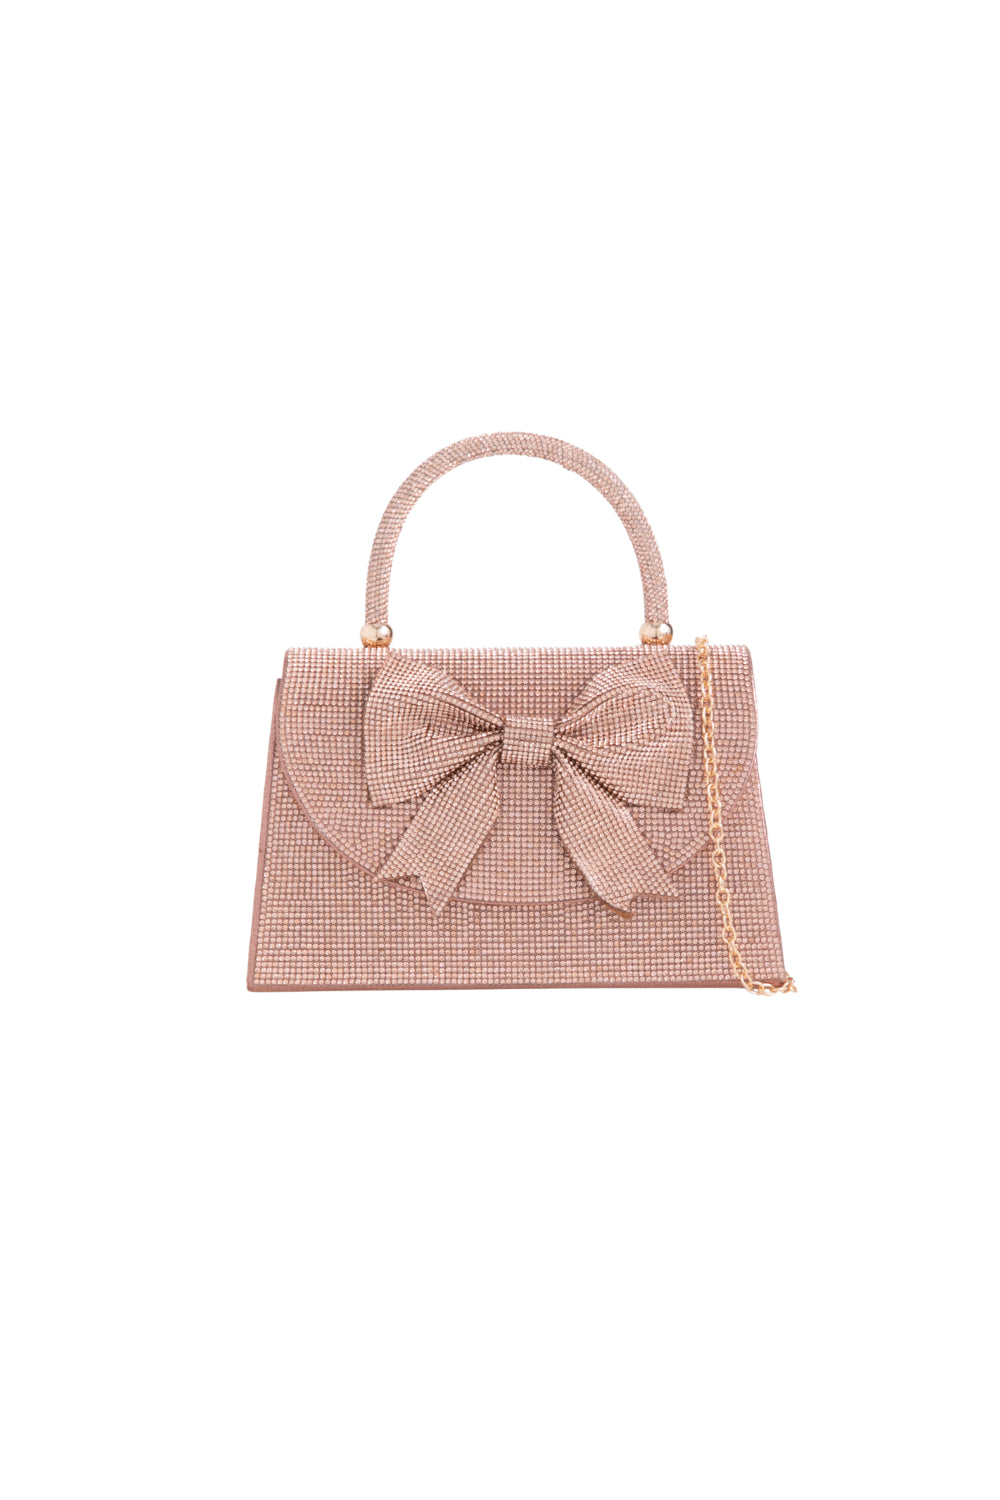 Rose Gold Diamante Evening Bag With Bow